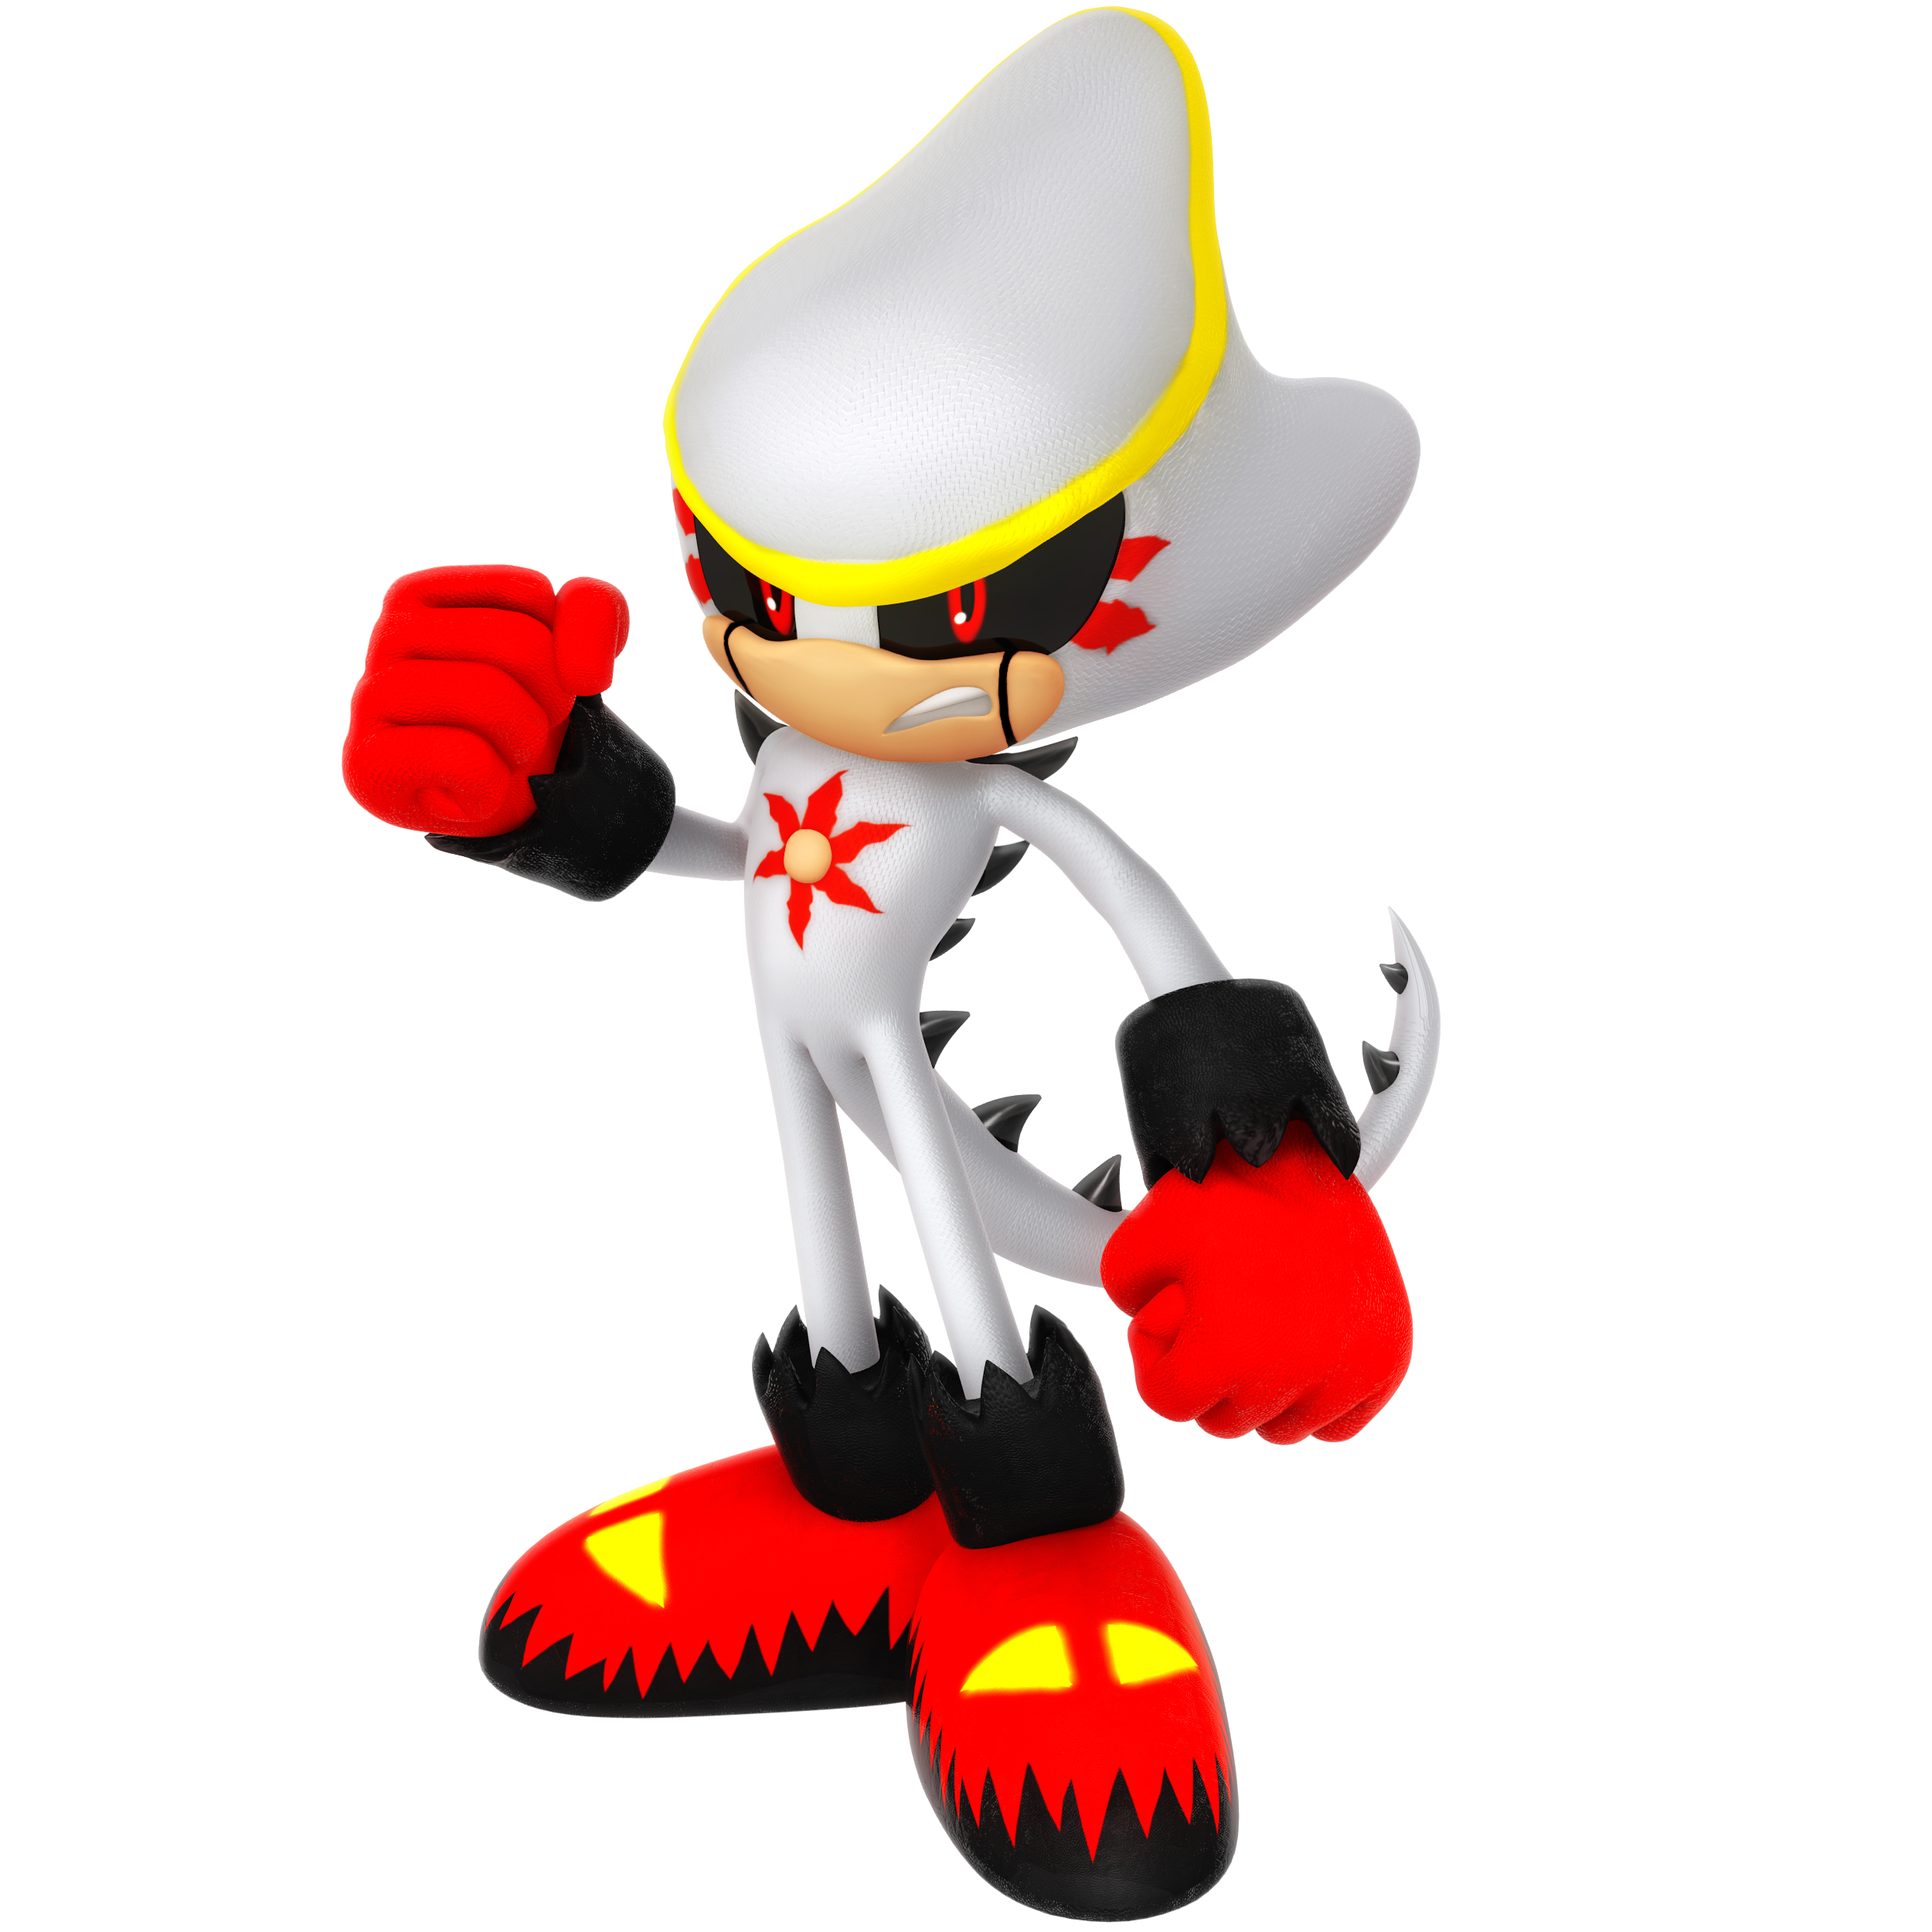 Mighty the Armadillo Legacy Render by Nibroc-Rock on DeviantArt